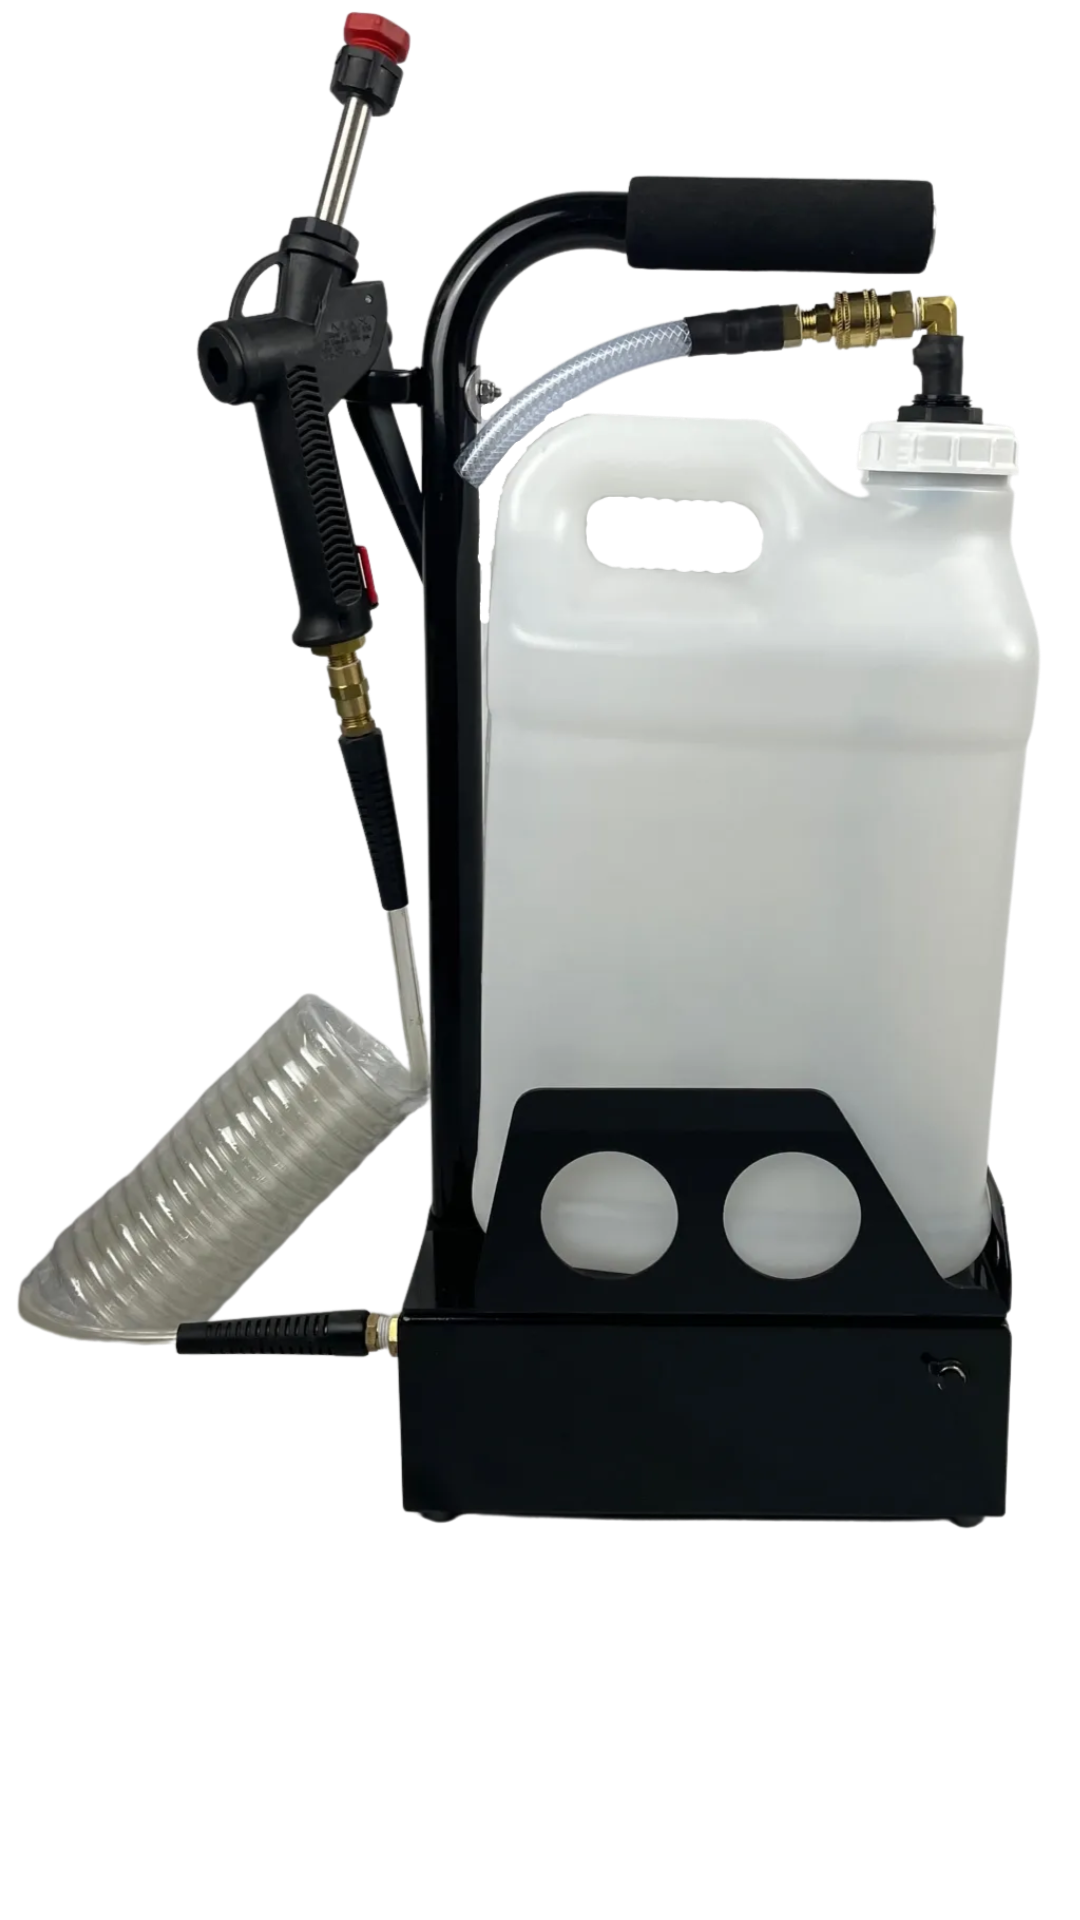 Best Battery Operated Sprayer for Car Detailing